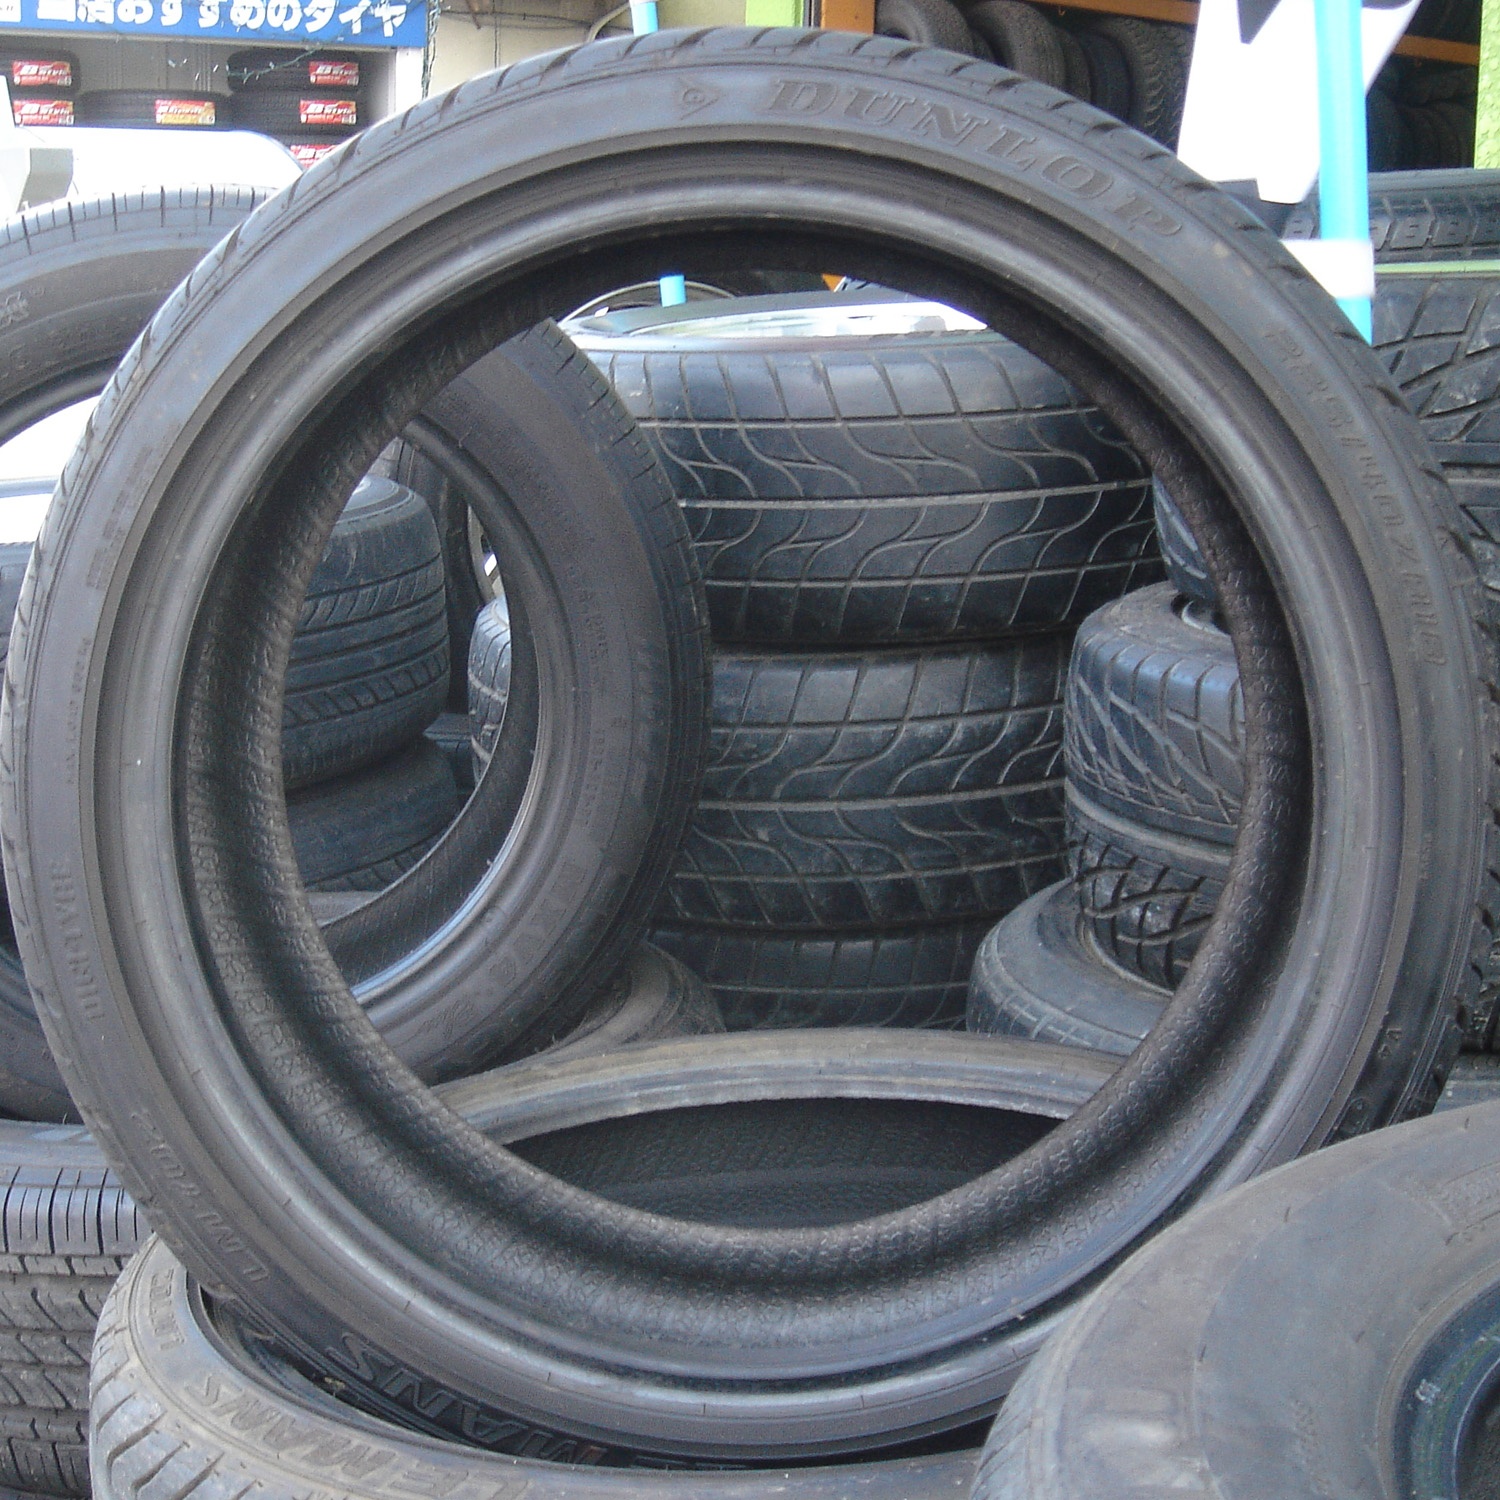 How to Prolong the Life of Your Car Tires?